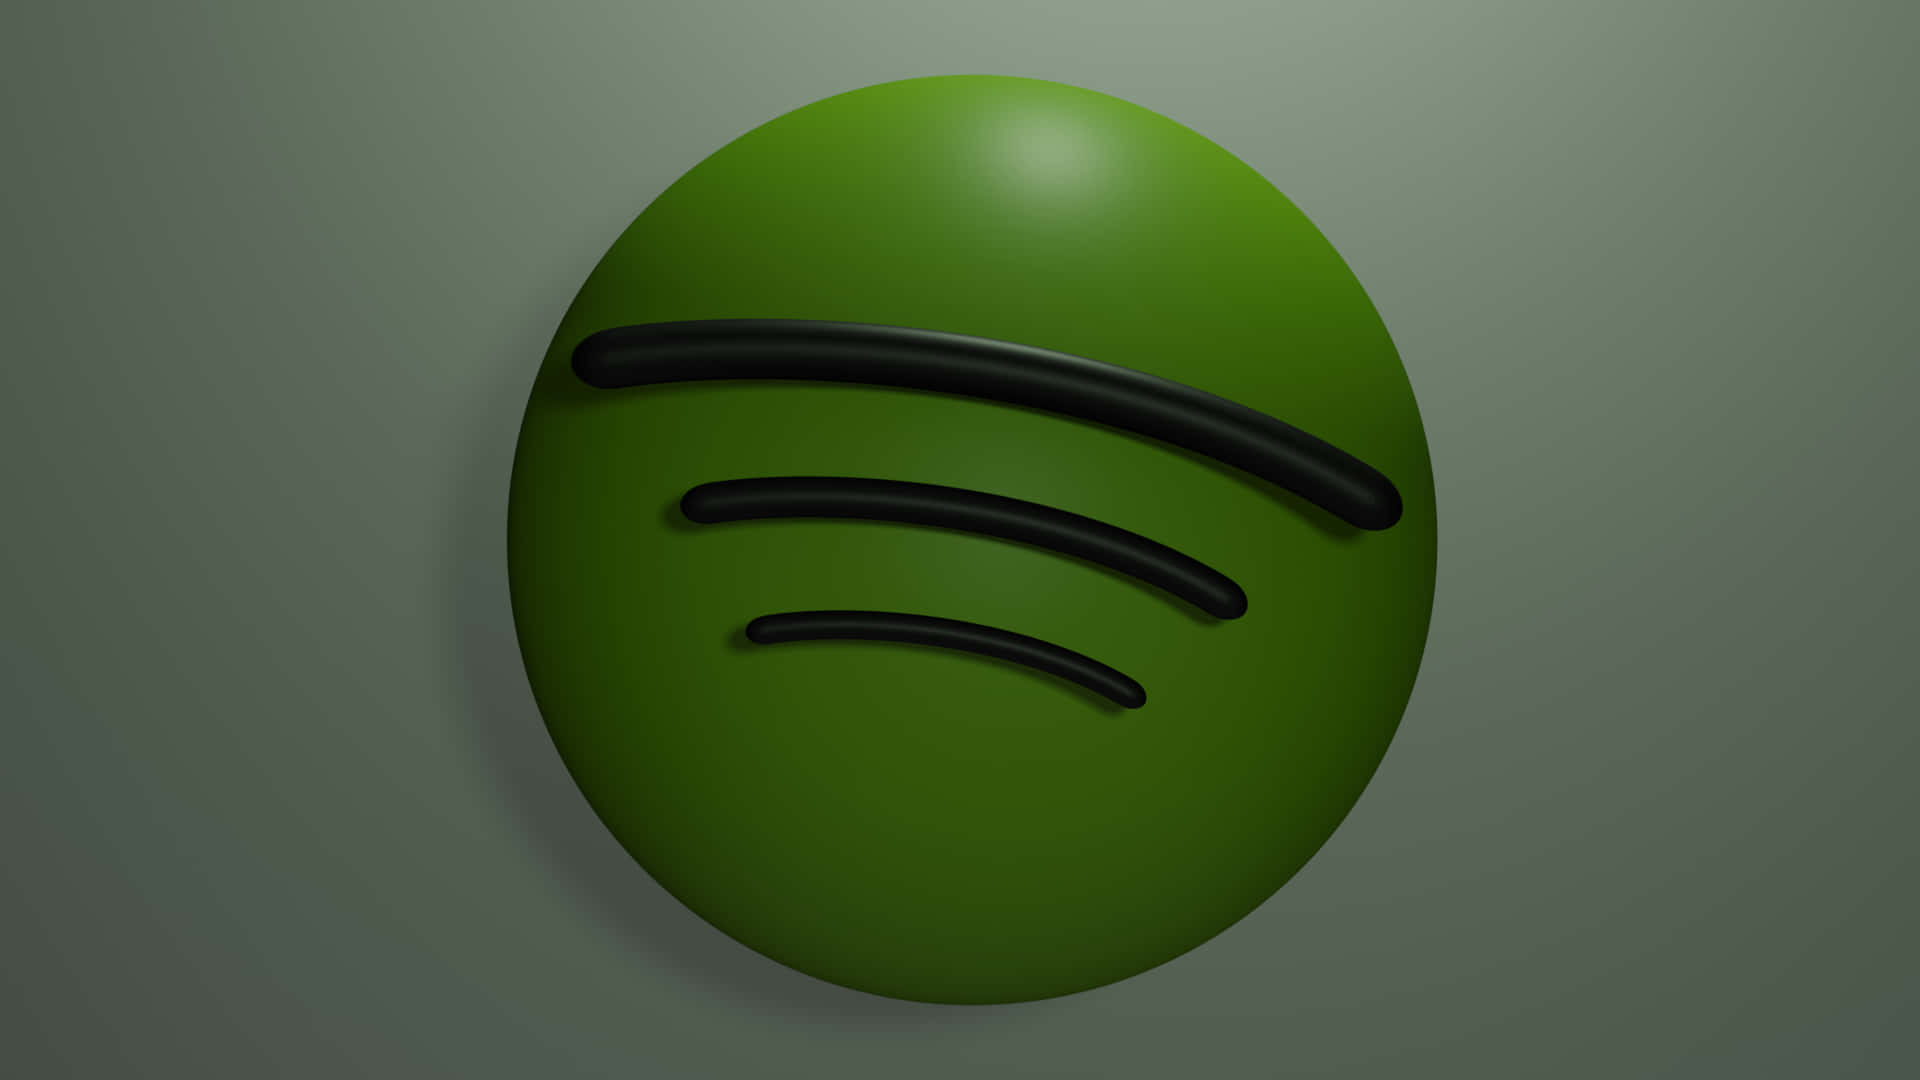 Spotify - A Green Icon With Black Stripes